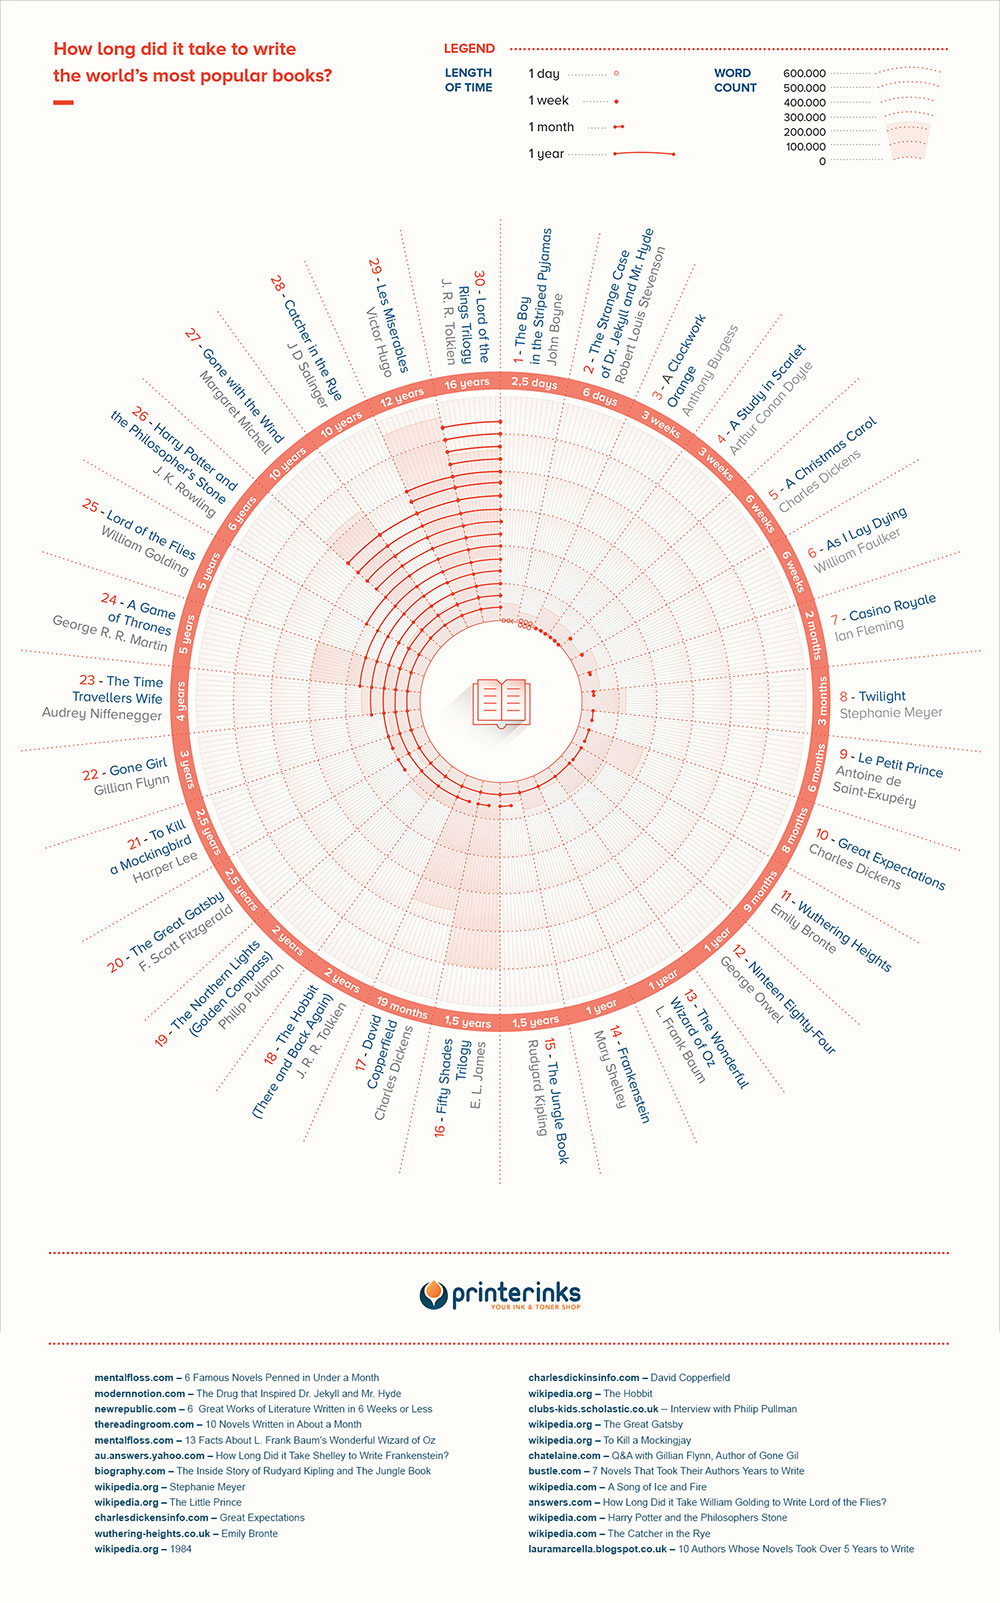 How-Long-Did-it-Take-to-Write-the-World’s-Most-Famous-Books